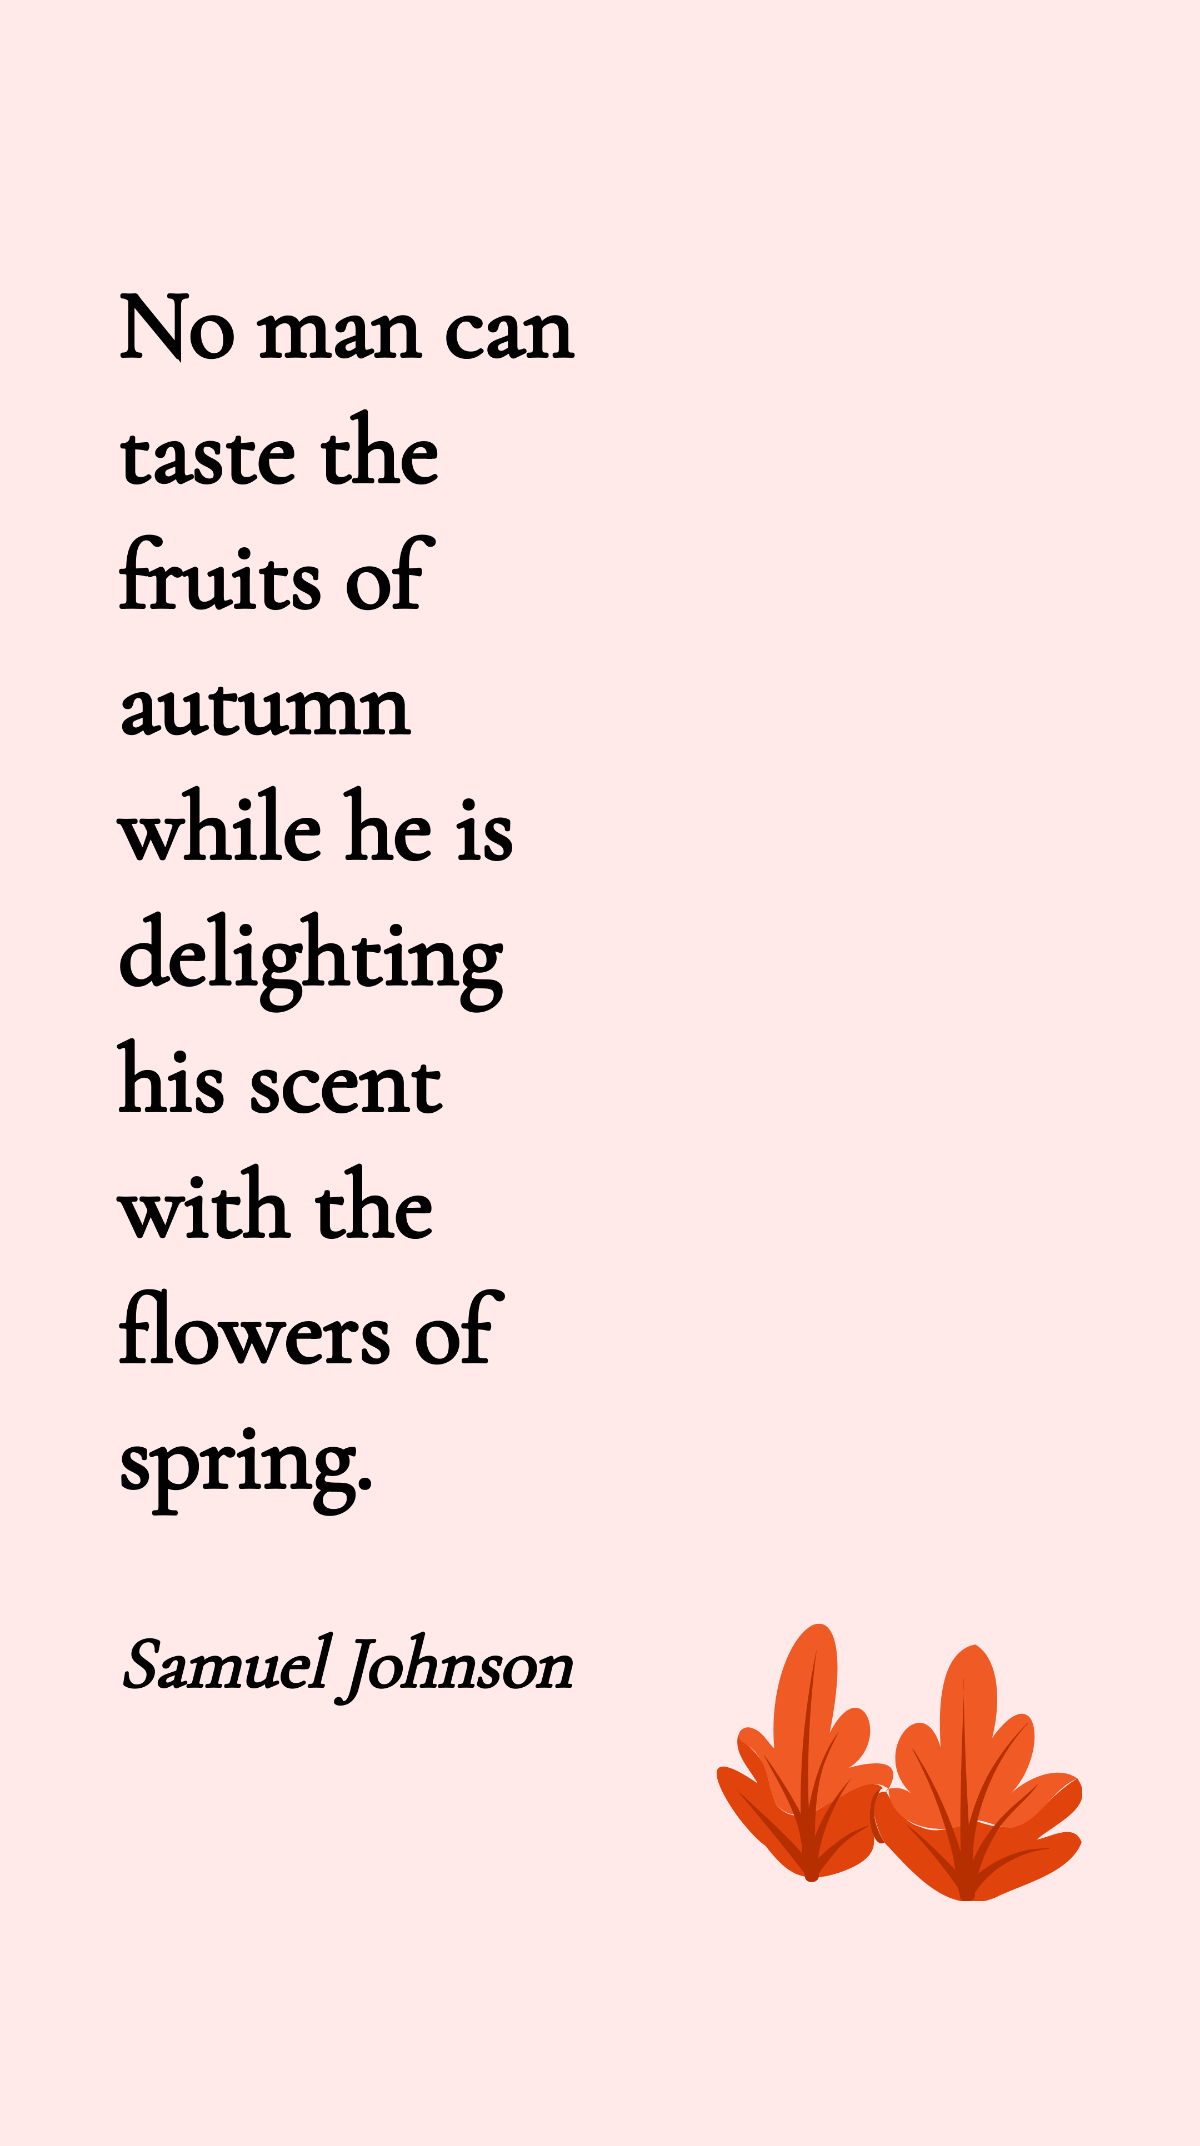 Free Samuel Johnson - No man can taste the fruits of autumn while he is delighting his scent with the flowers of spring. Template